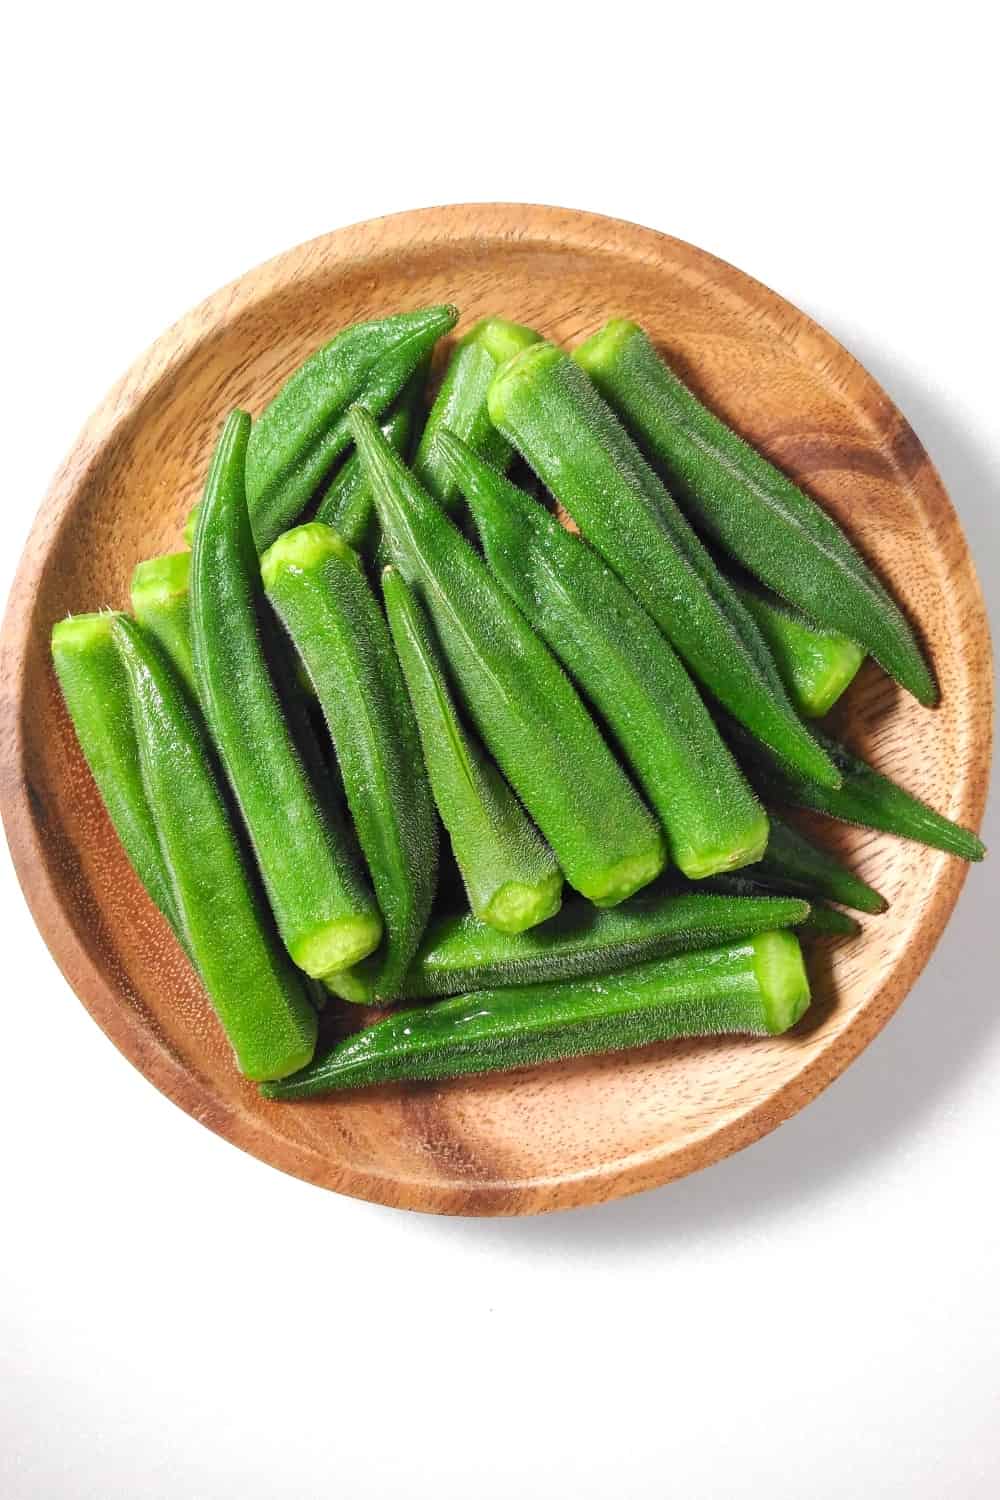 Top view of pile of fresh green okra on wooden plate